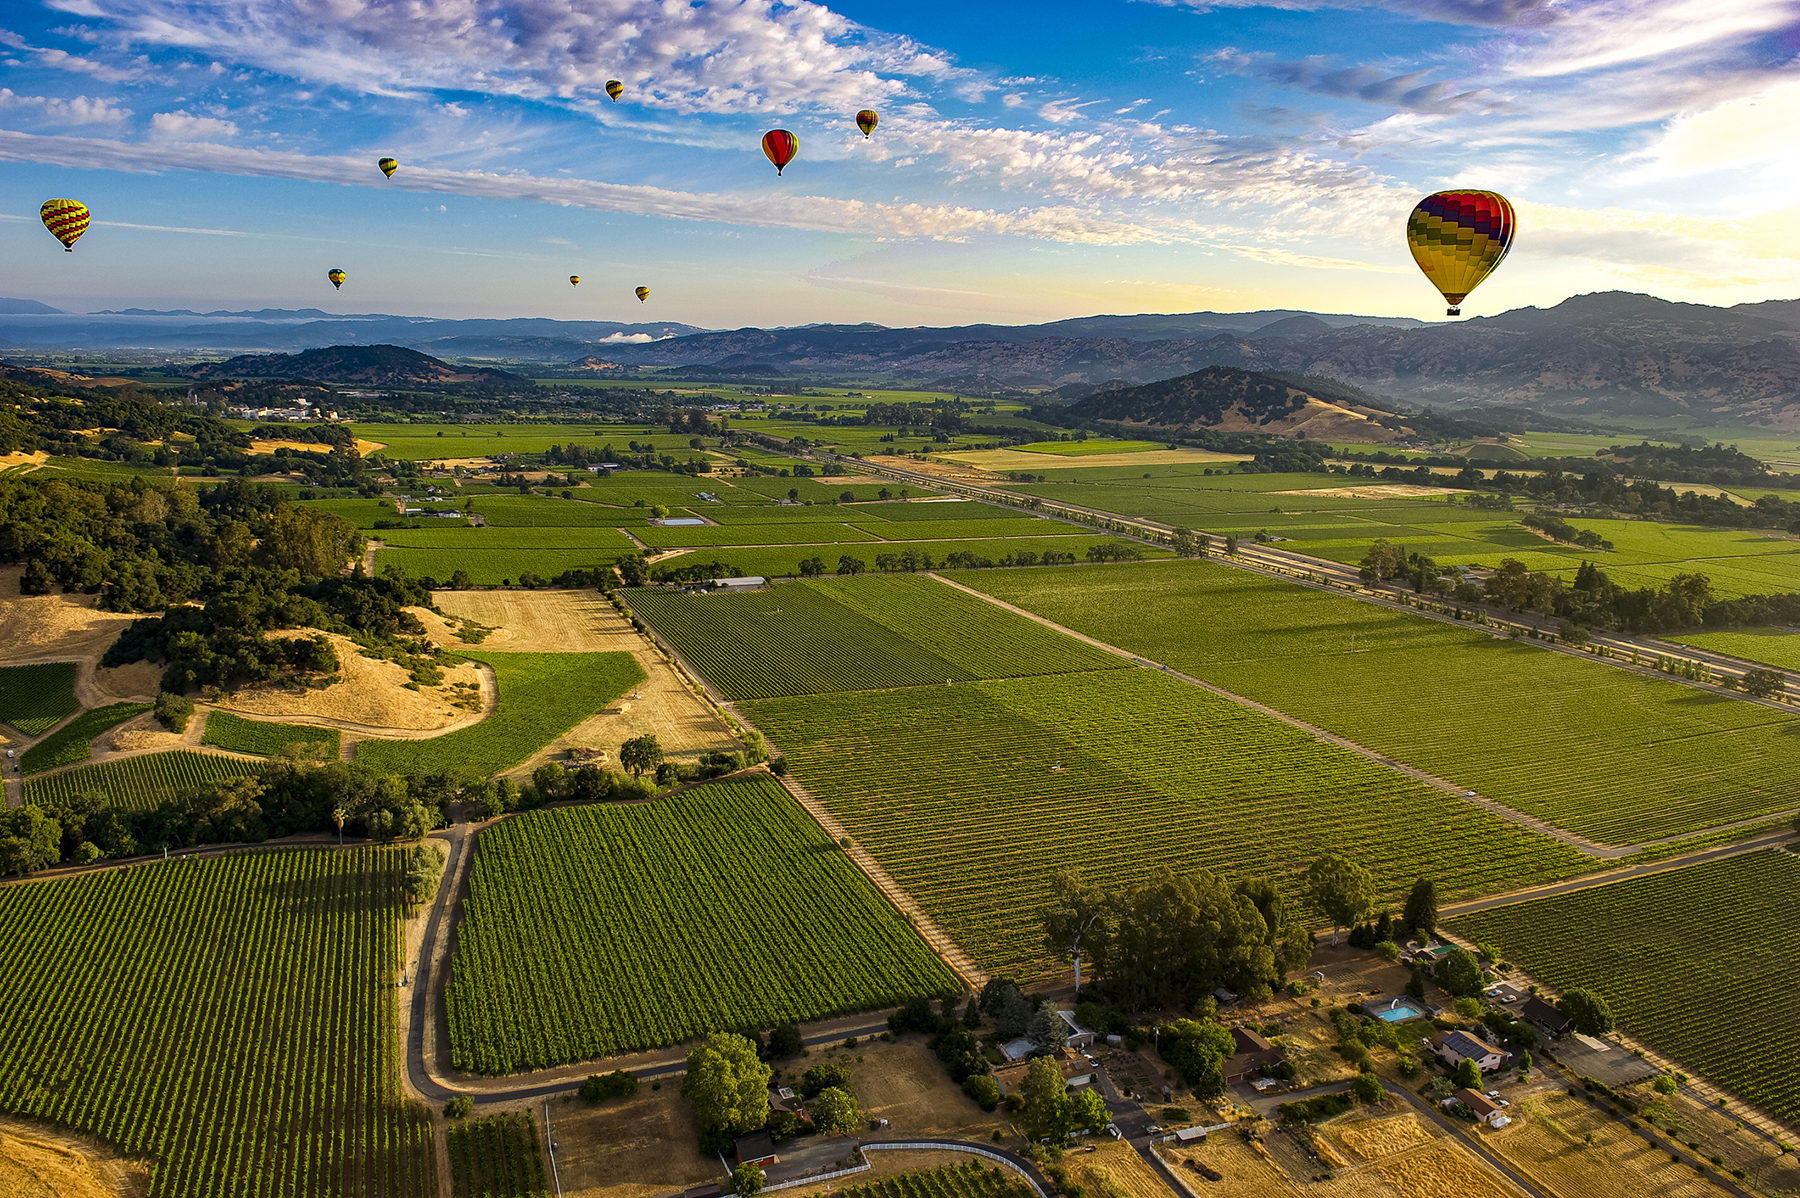 Colorful hot air balloons float over vineyards.